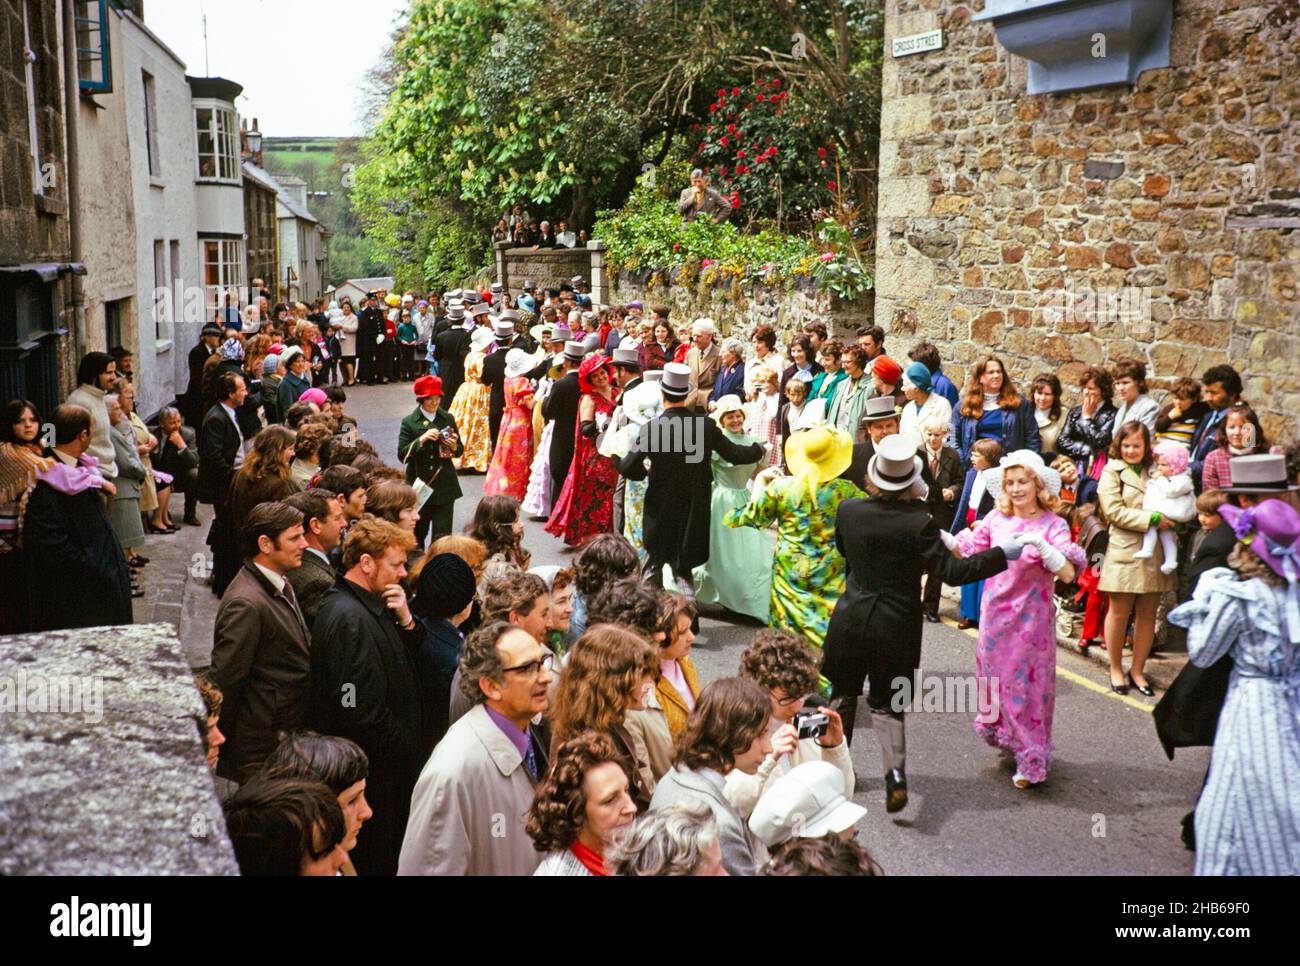 Flora Day, Helston, Cornwall, England, UK 1973 - crowds watch couples perform the  Furry dance in the streets of the town Stock Photo